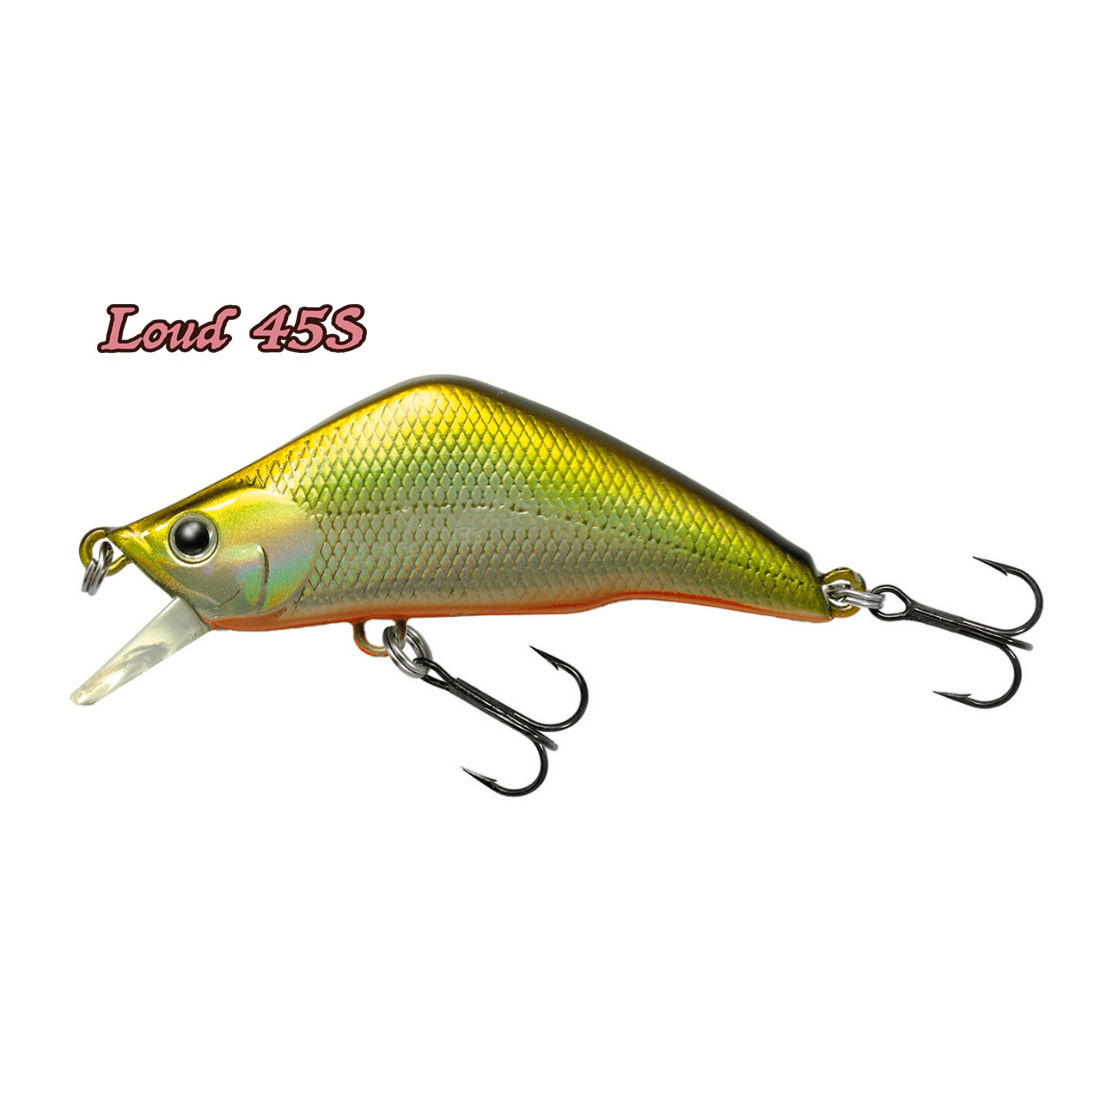 TIEMCO LOUD 45S 45mm 3.4gr Color 004 LH Tennessee Shad